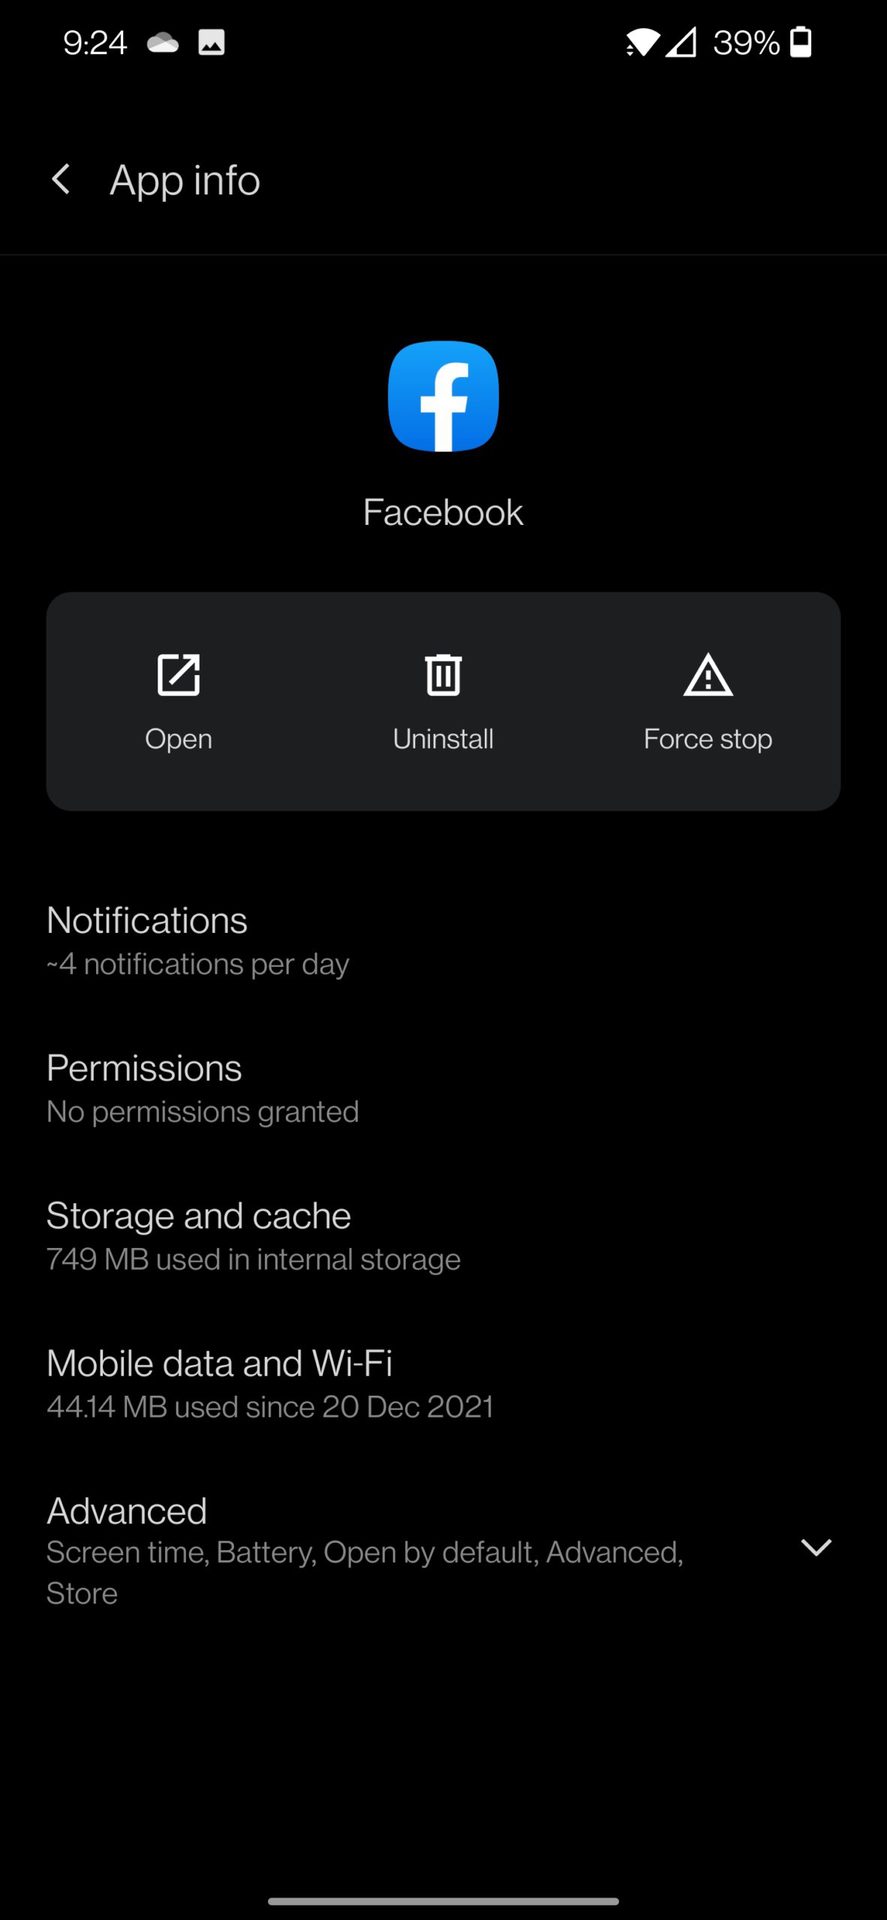 Clear cache and data: Regularly clear the cache and data of your Facebook app to free up storage space and remove any potential playback errors.
Disable data-saving mode: If you have enabled data-saving mode on your Android device, consider disabling it as it may interfere with video playback on Facebook.